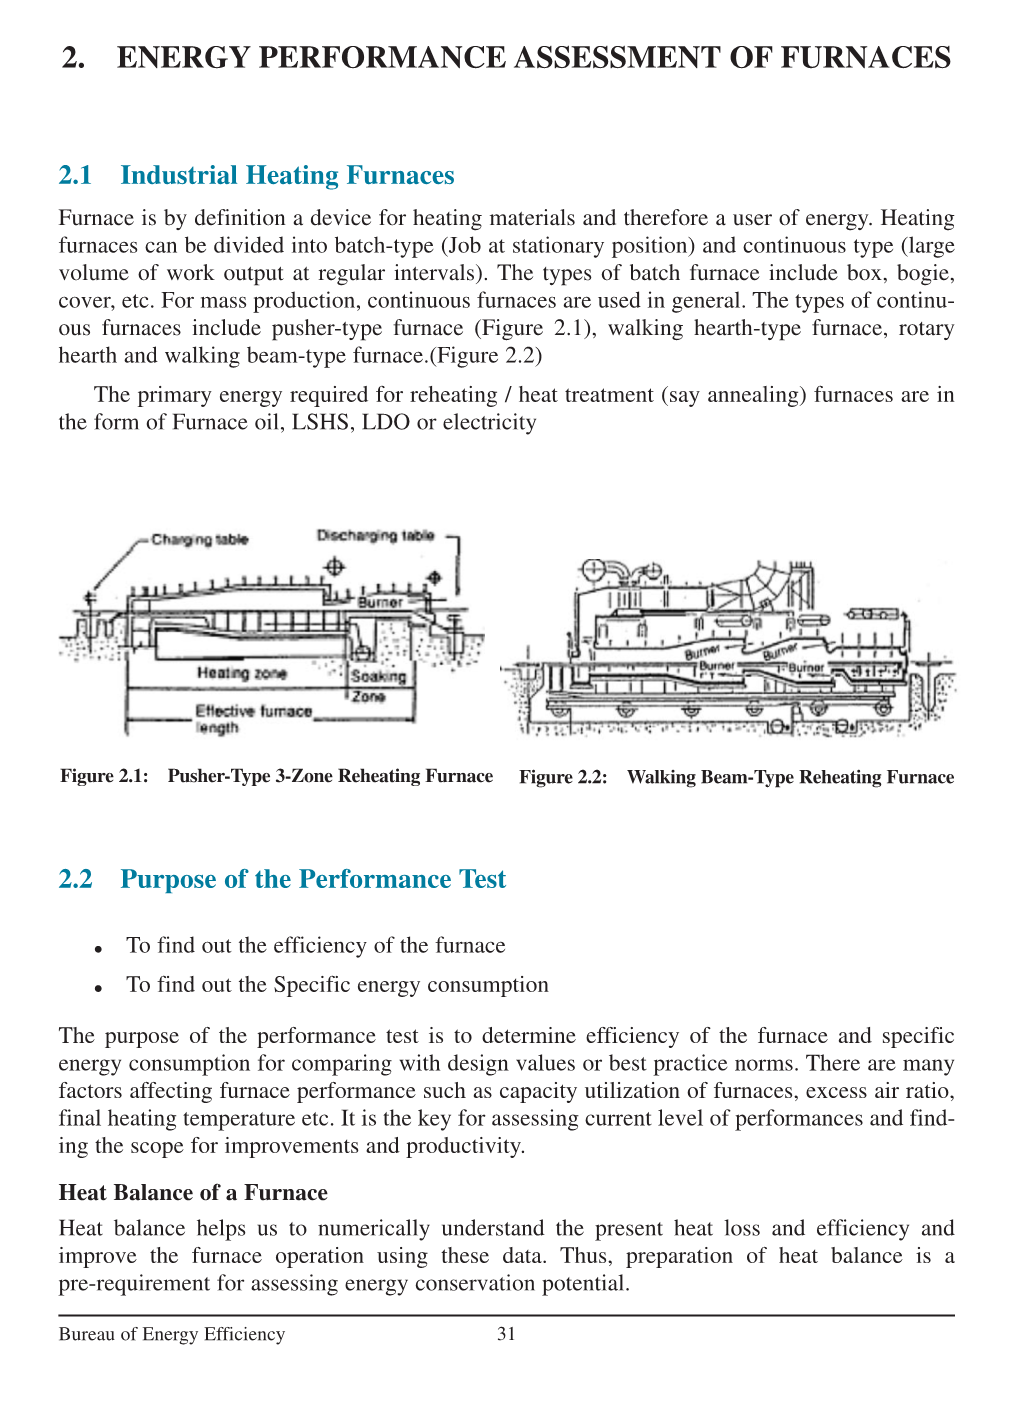 2. Energy Performance Assessment of Furnaces